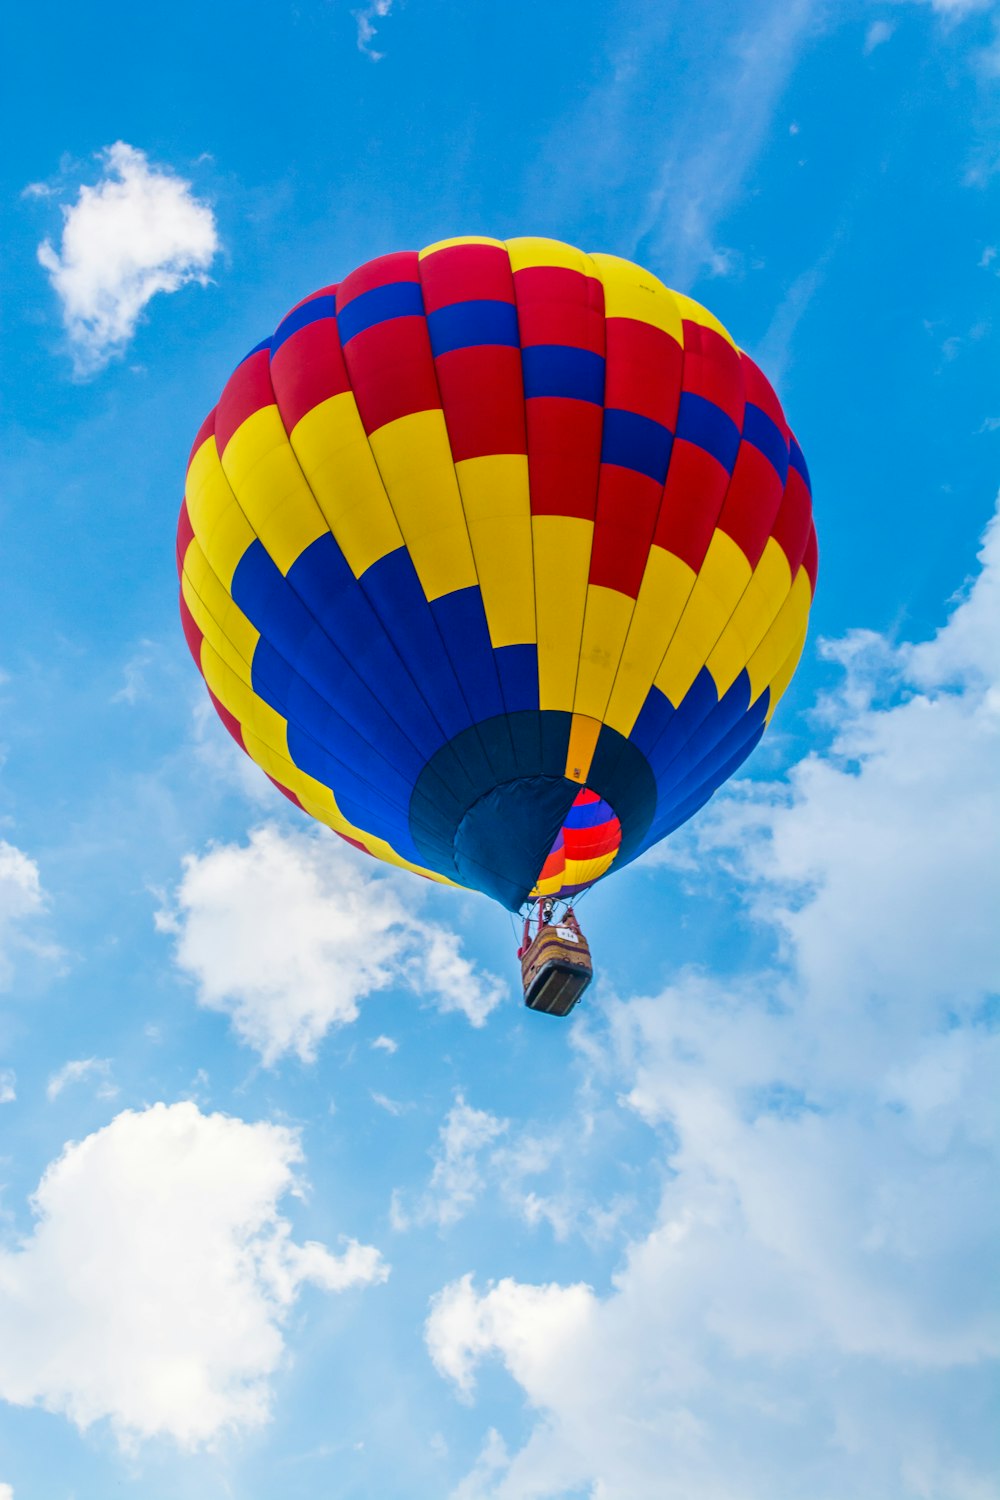 yellow, red, and blue hot air balloon flying during daytime